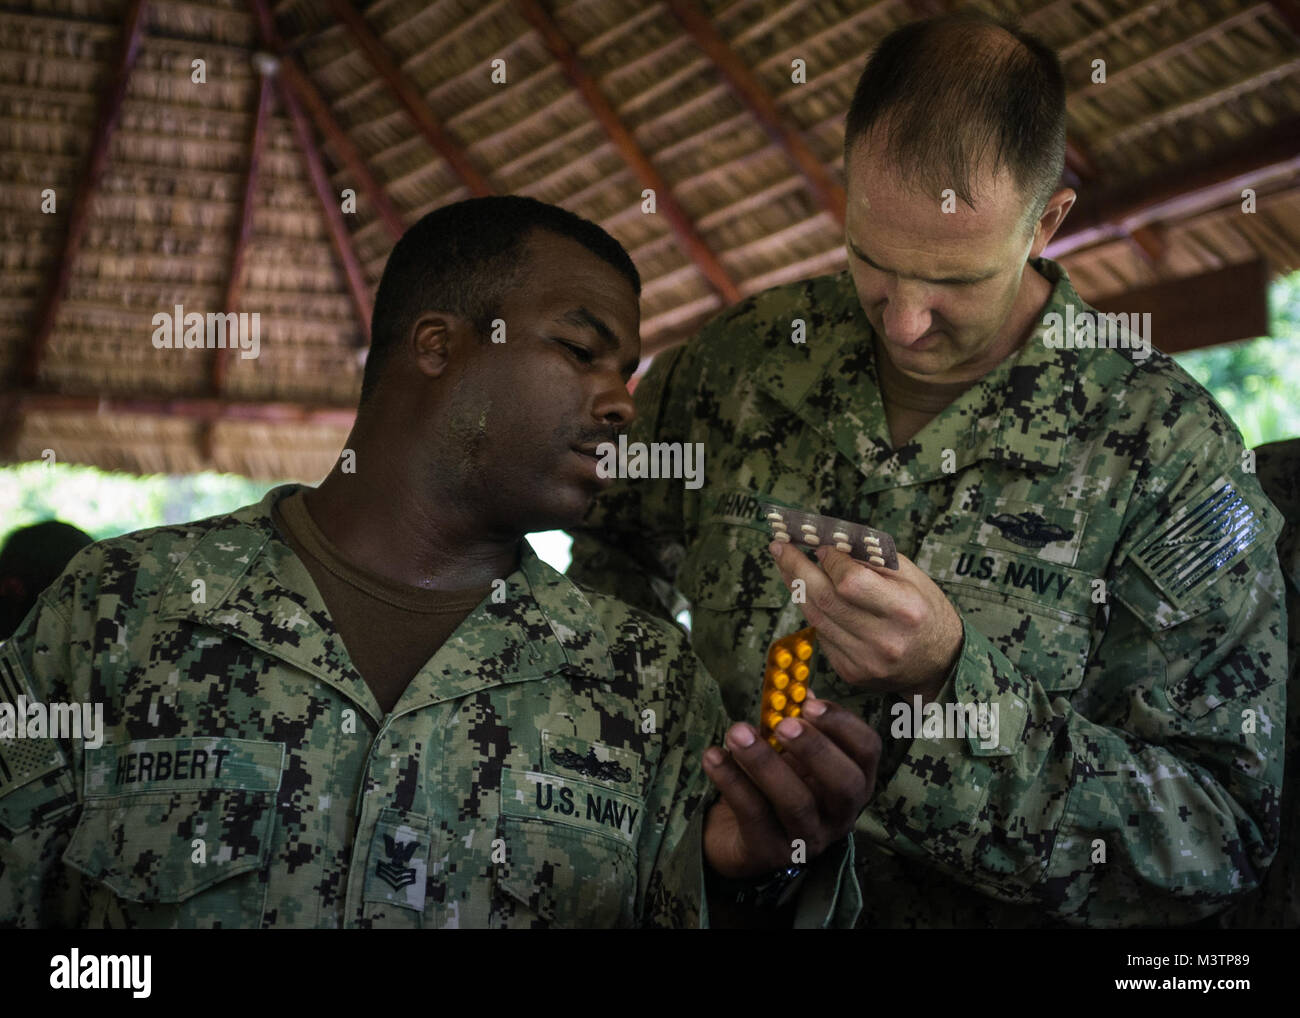 CABANAS, El Salvador (Sep. 1, 2016) - Hospital Corpsman 1st Class Hasson Herbert, a preventive medicine technician, left, and Lt. Christian Johnroe, an environmental health officer, both assigned to Naval Environmental Preventive Medicine Unit 2, help Operation Blessing’s Medical Brigade set up a temporary pharmacy station in Chalatenango, El Salvador during Southern Partnership Station 2016 (SPS 16). Operation Blessing’s Medical Brigade is a nonprofit mobile patient care unit established to provide medical service to those affected natural disasters and render aid to rural areas. SPS 16 is an Stock Photo